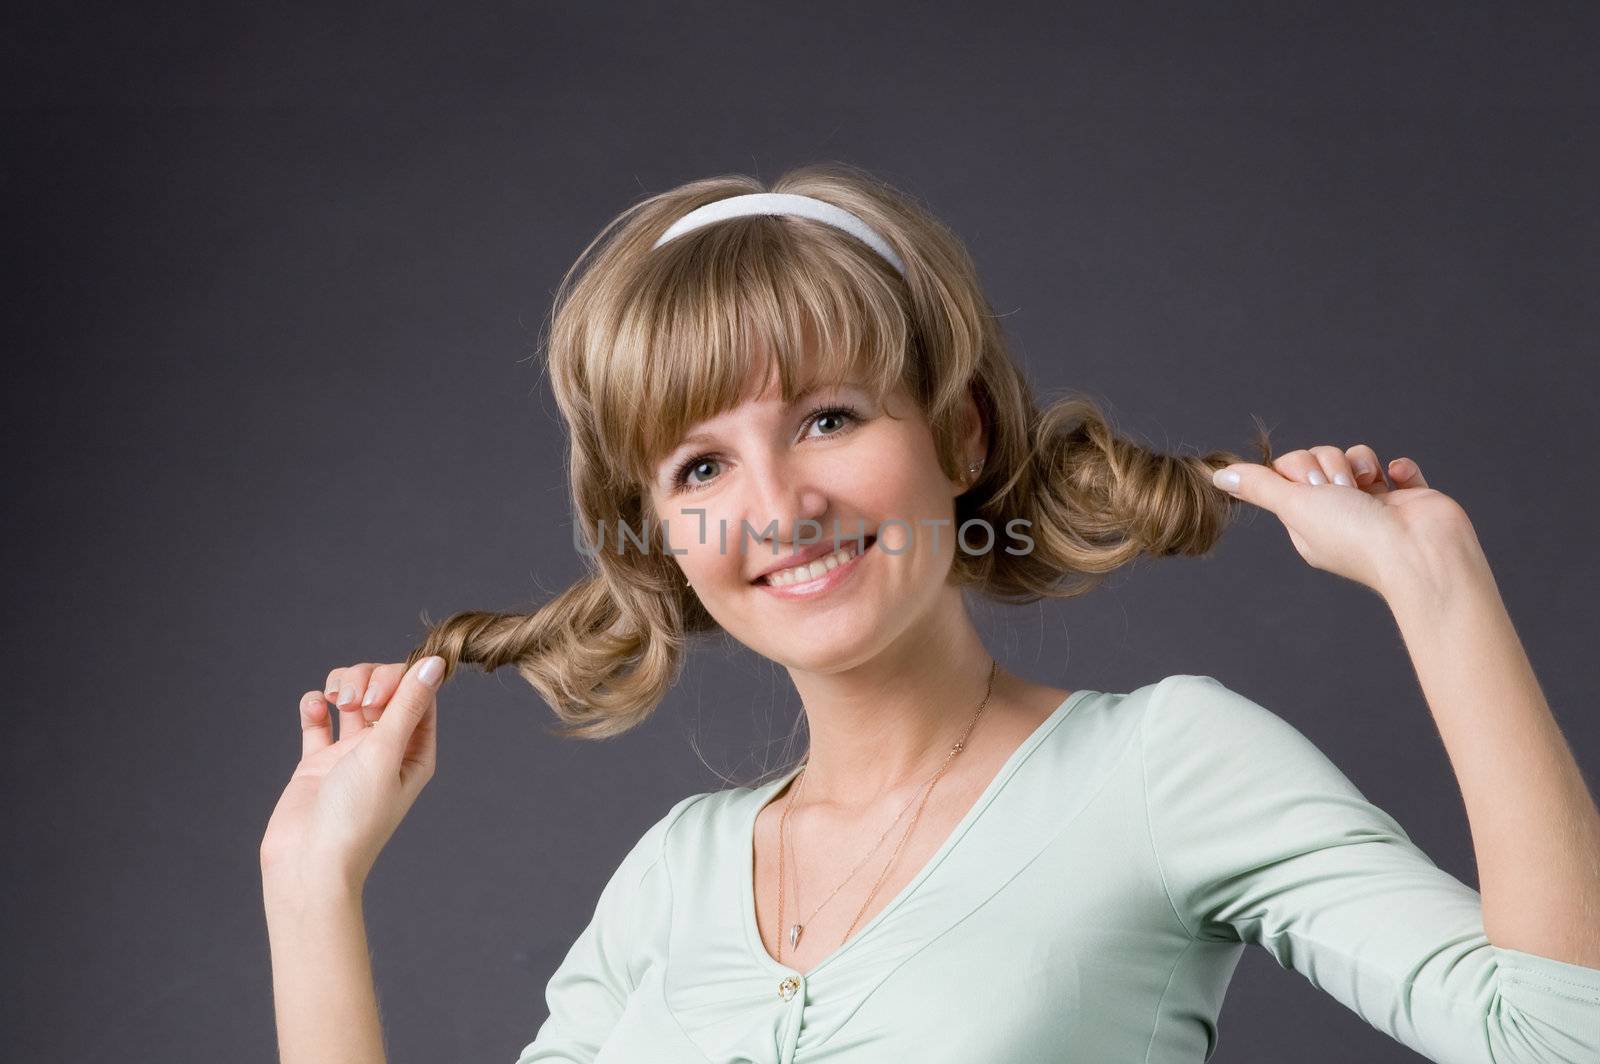 The girl tightens up hair in studio on a grey background